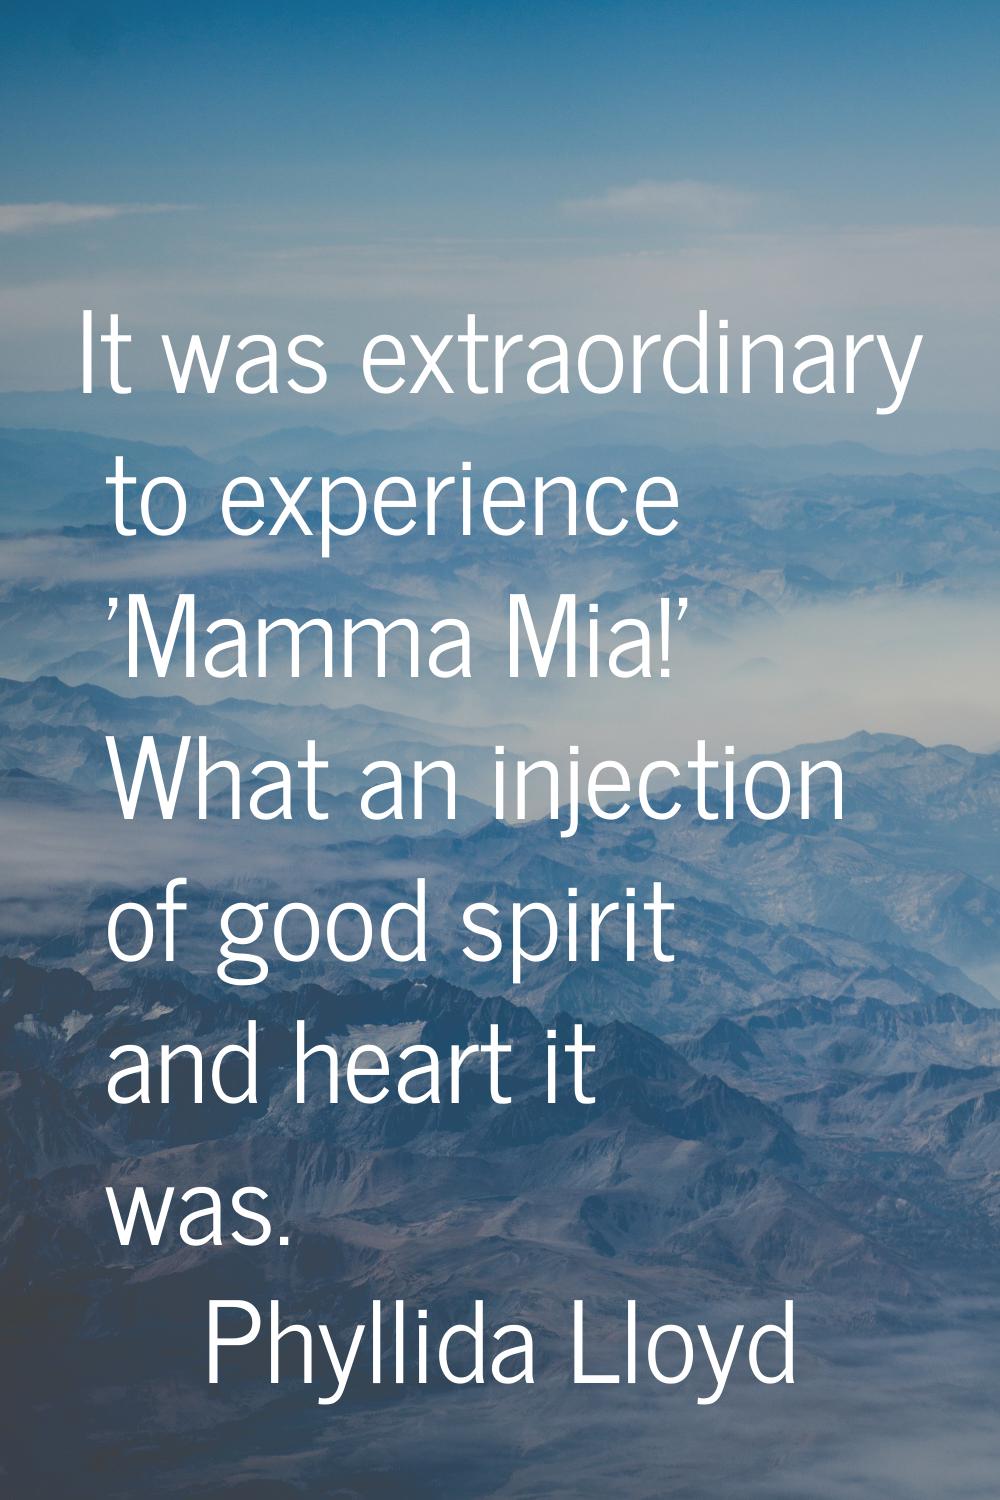 It was extraordinary to experience 'Mamma Mia!' What an injection of good spirit and heart it was.